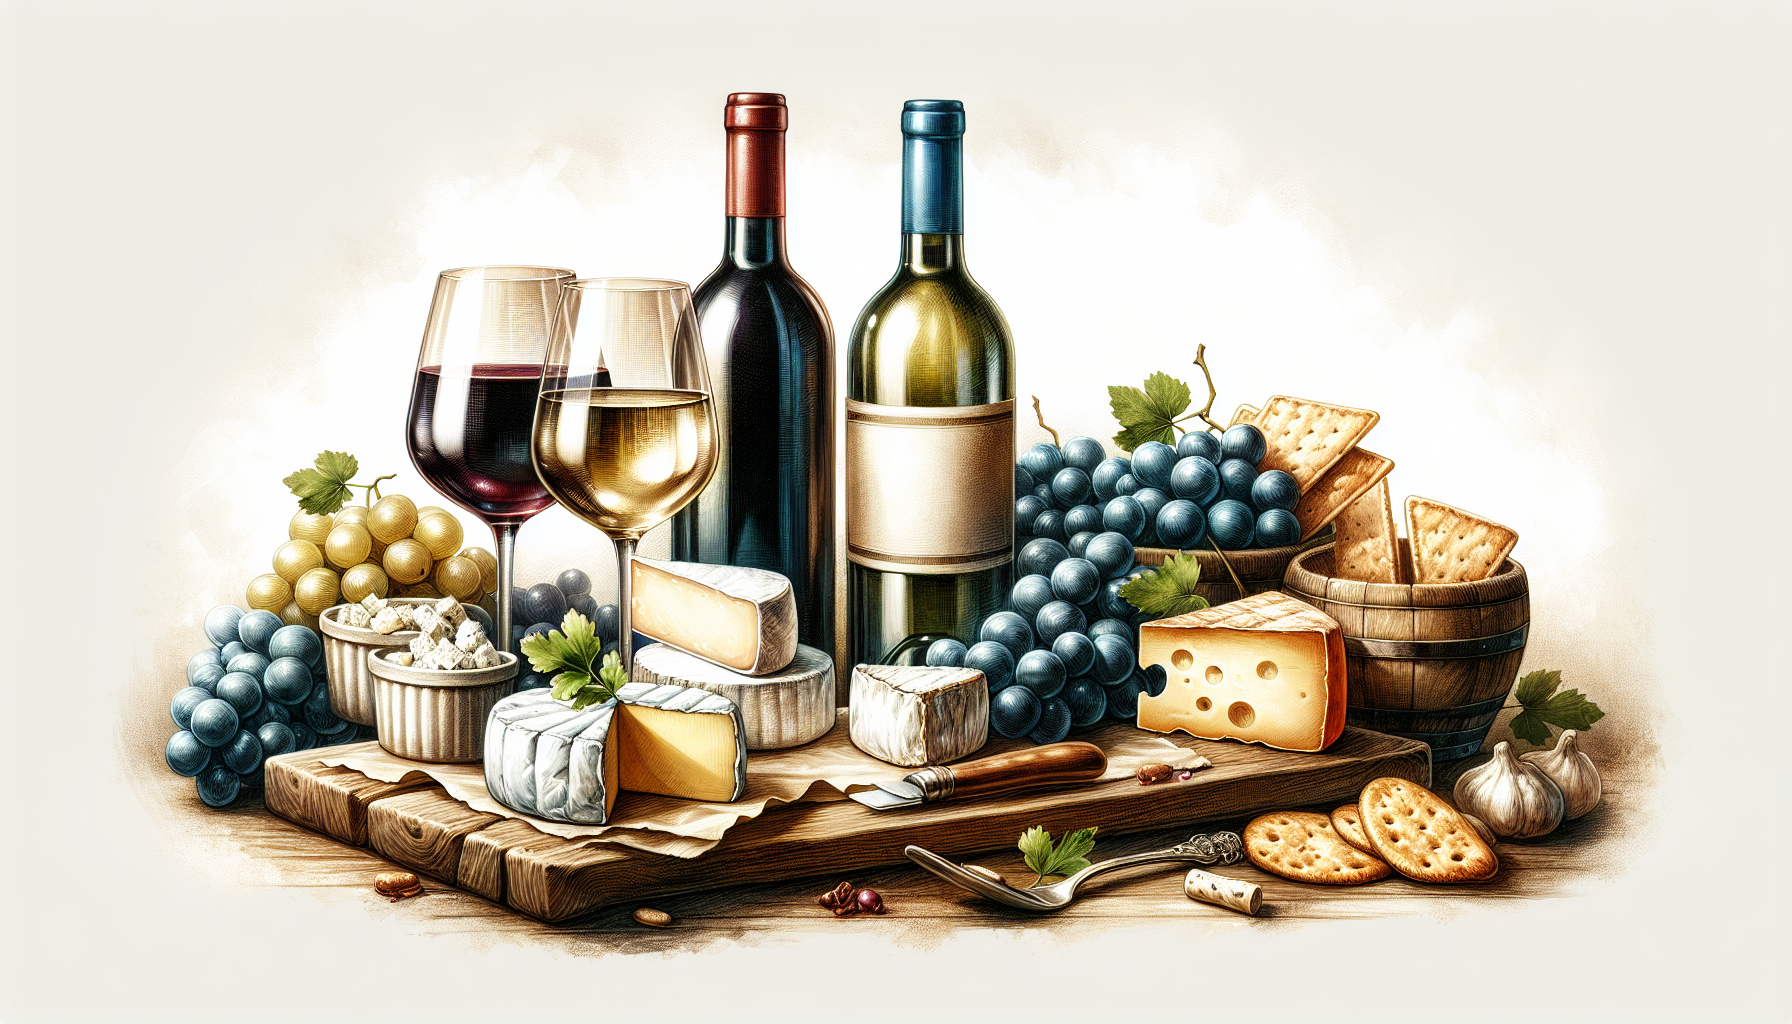 Illustration of pairing wine and cheese